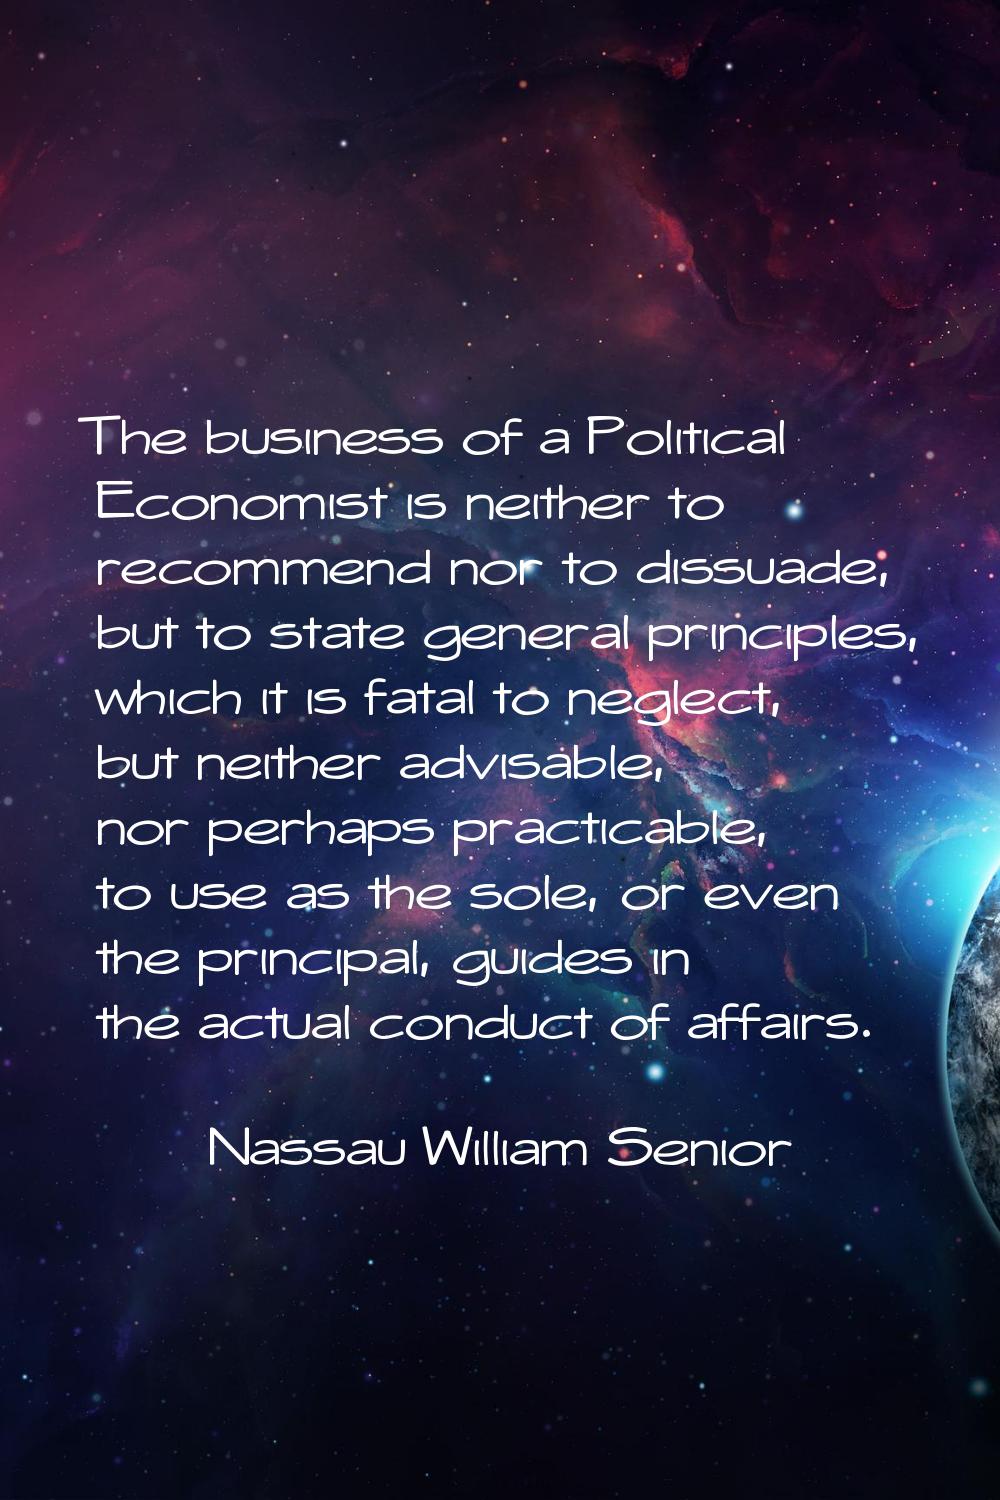 The business of a Political Economist is neither to recommend nor to dissuade, but to state general